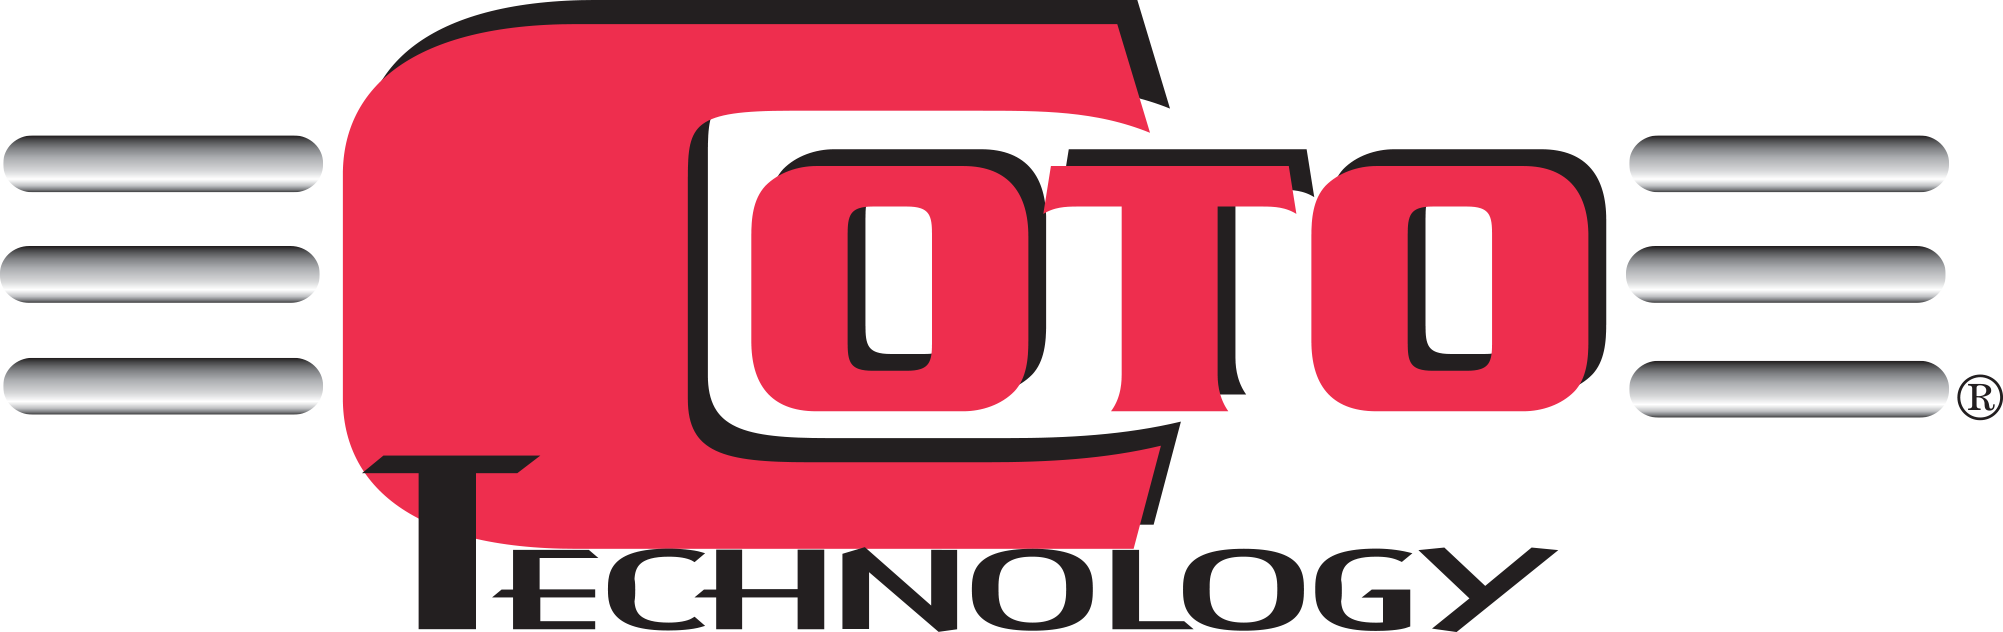 /images/brand/coto-technology.png